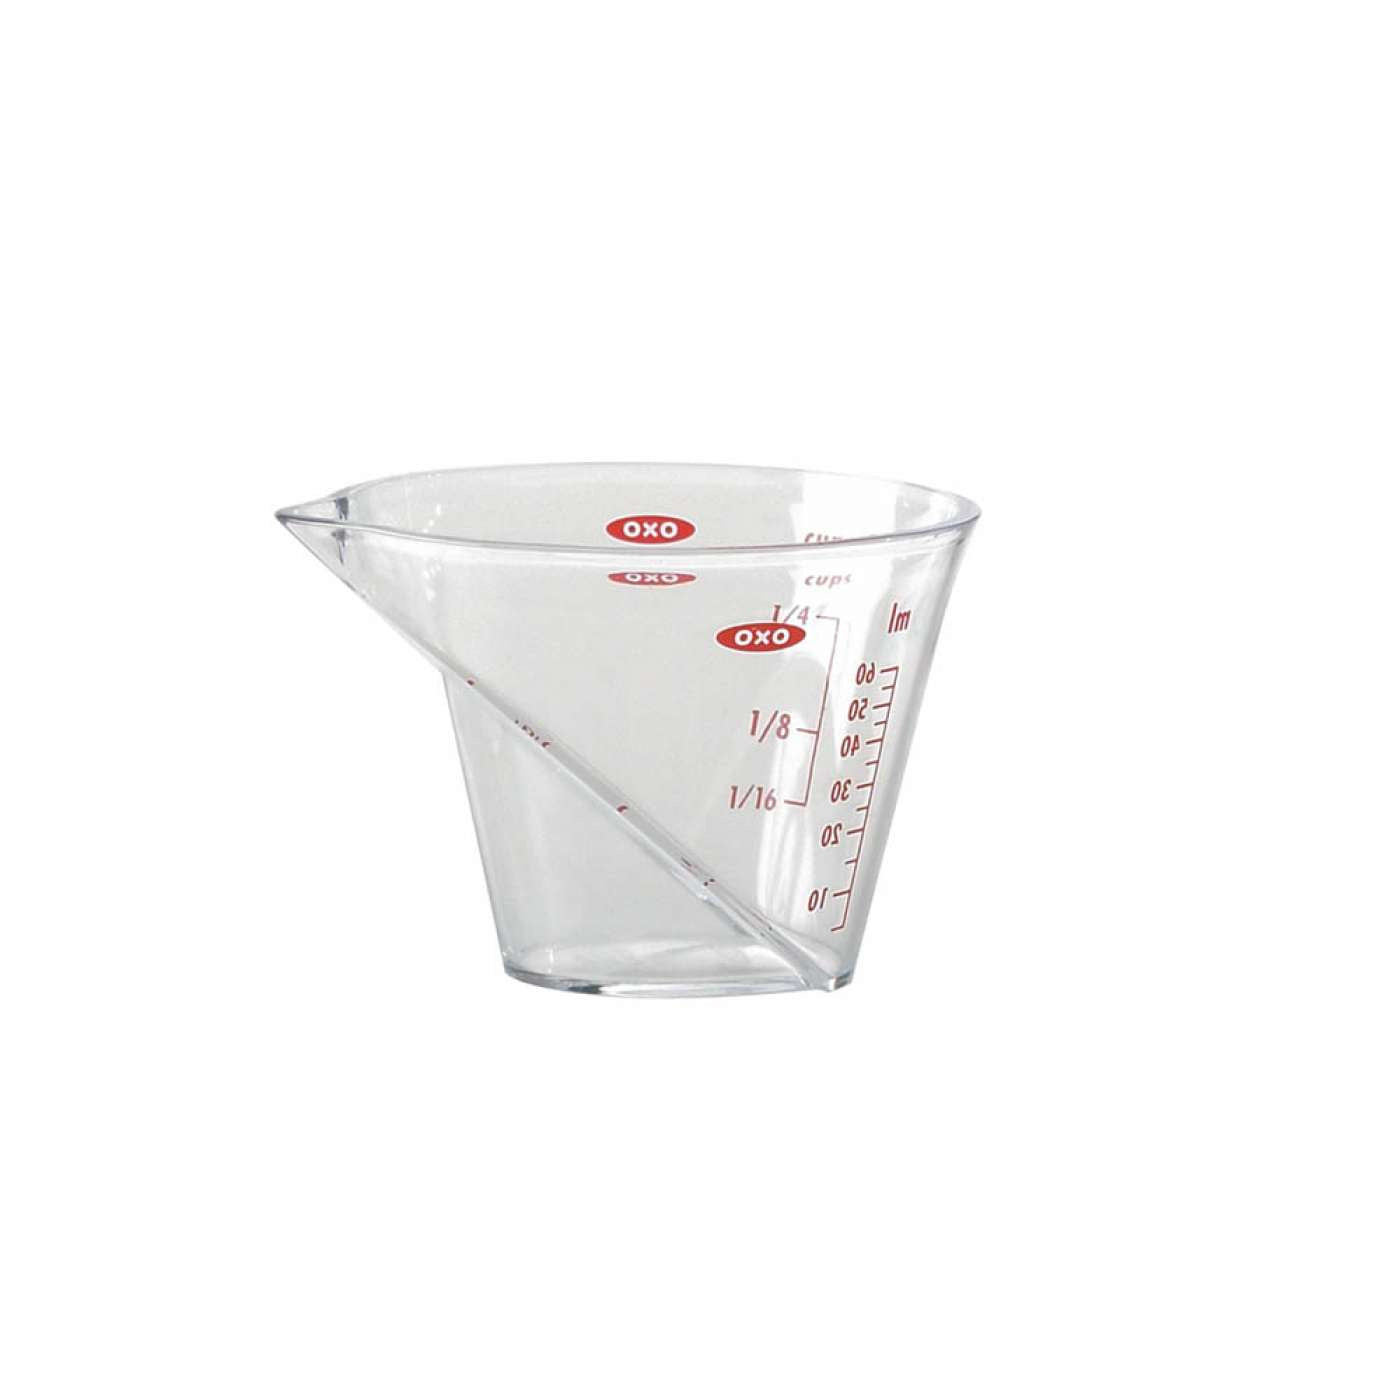 1/4 Cup, Good Grips Mini Angled Measuring Cup